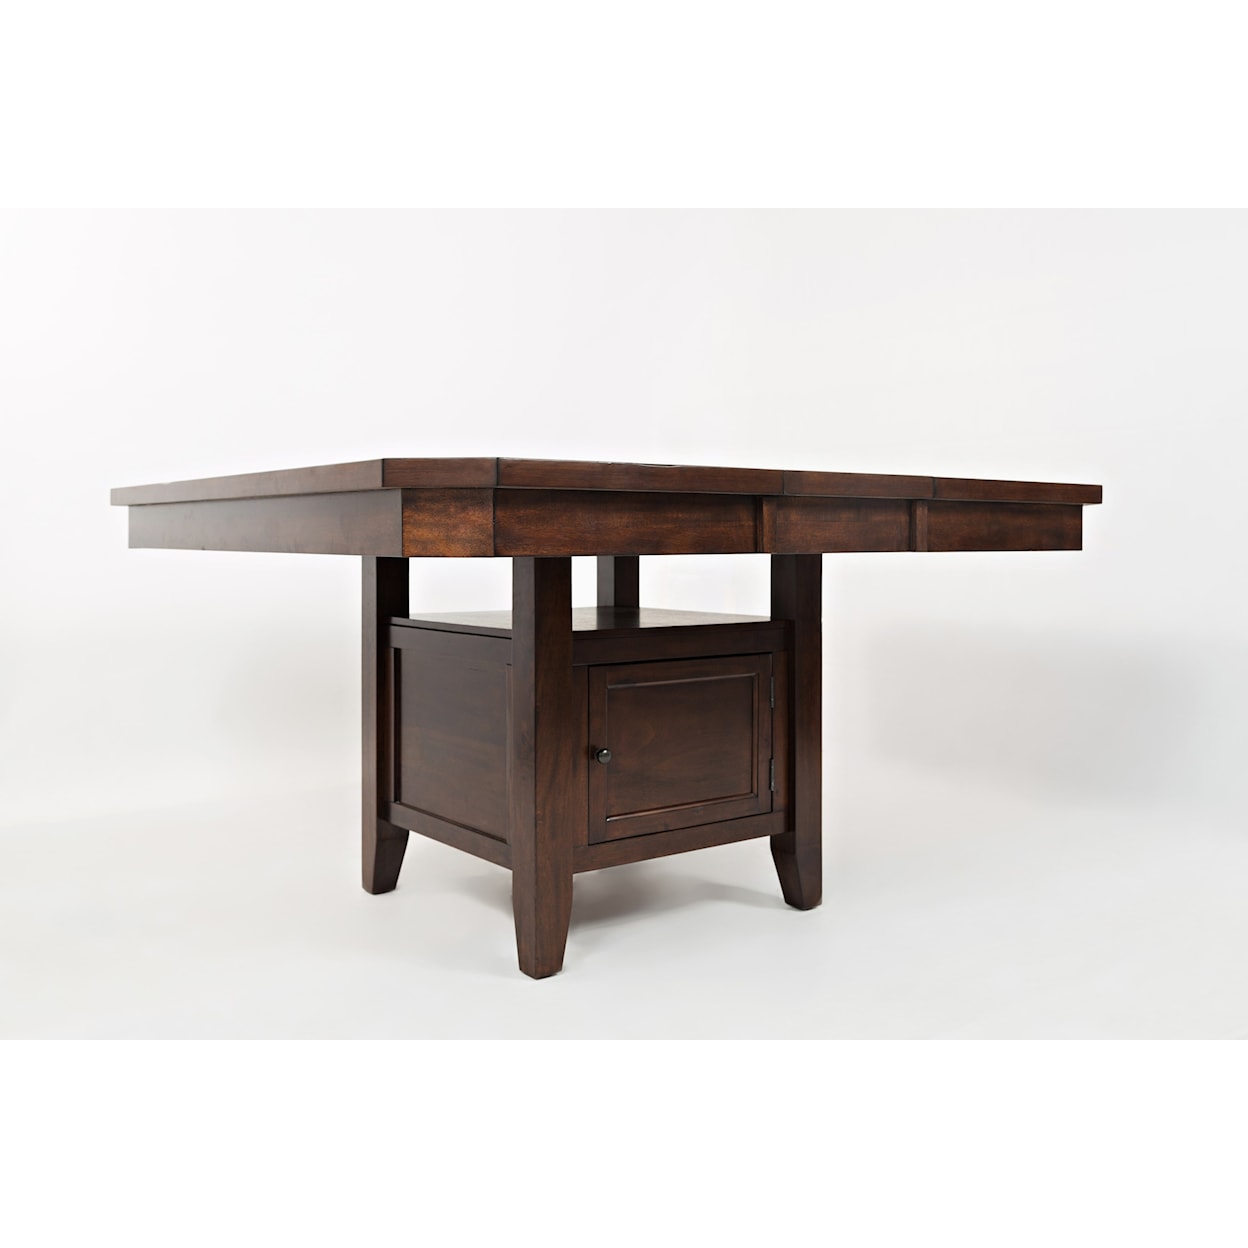 VFM Signature Manchester High/Low Table with Storage Base